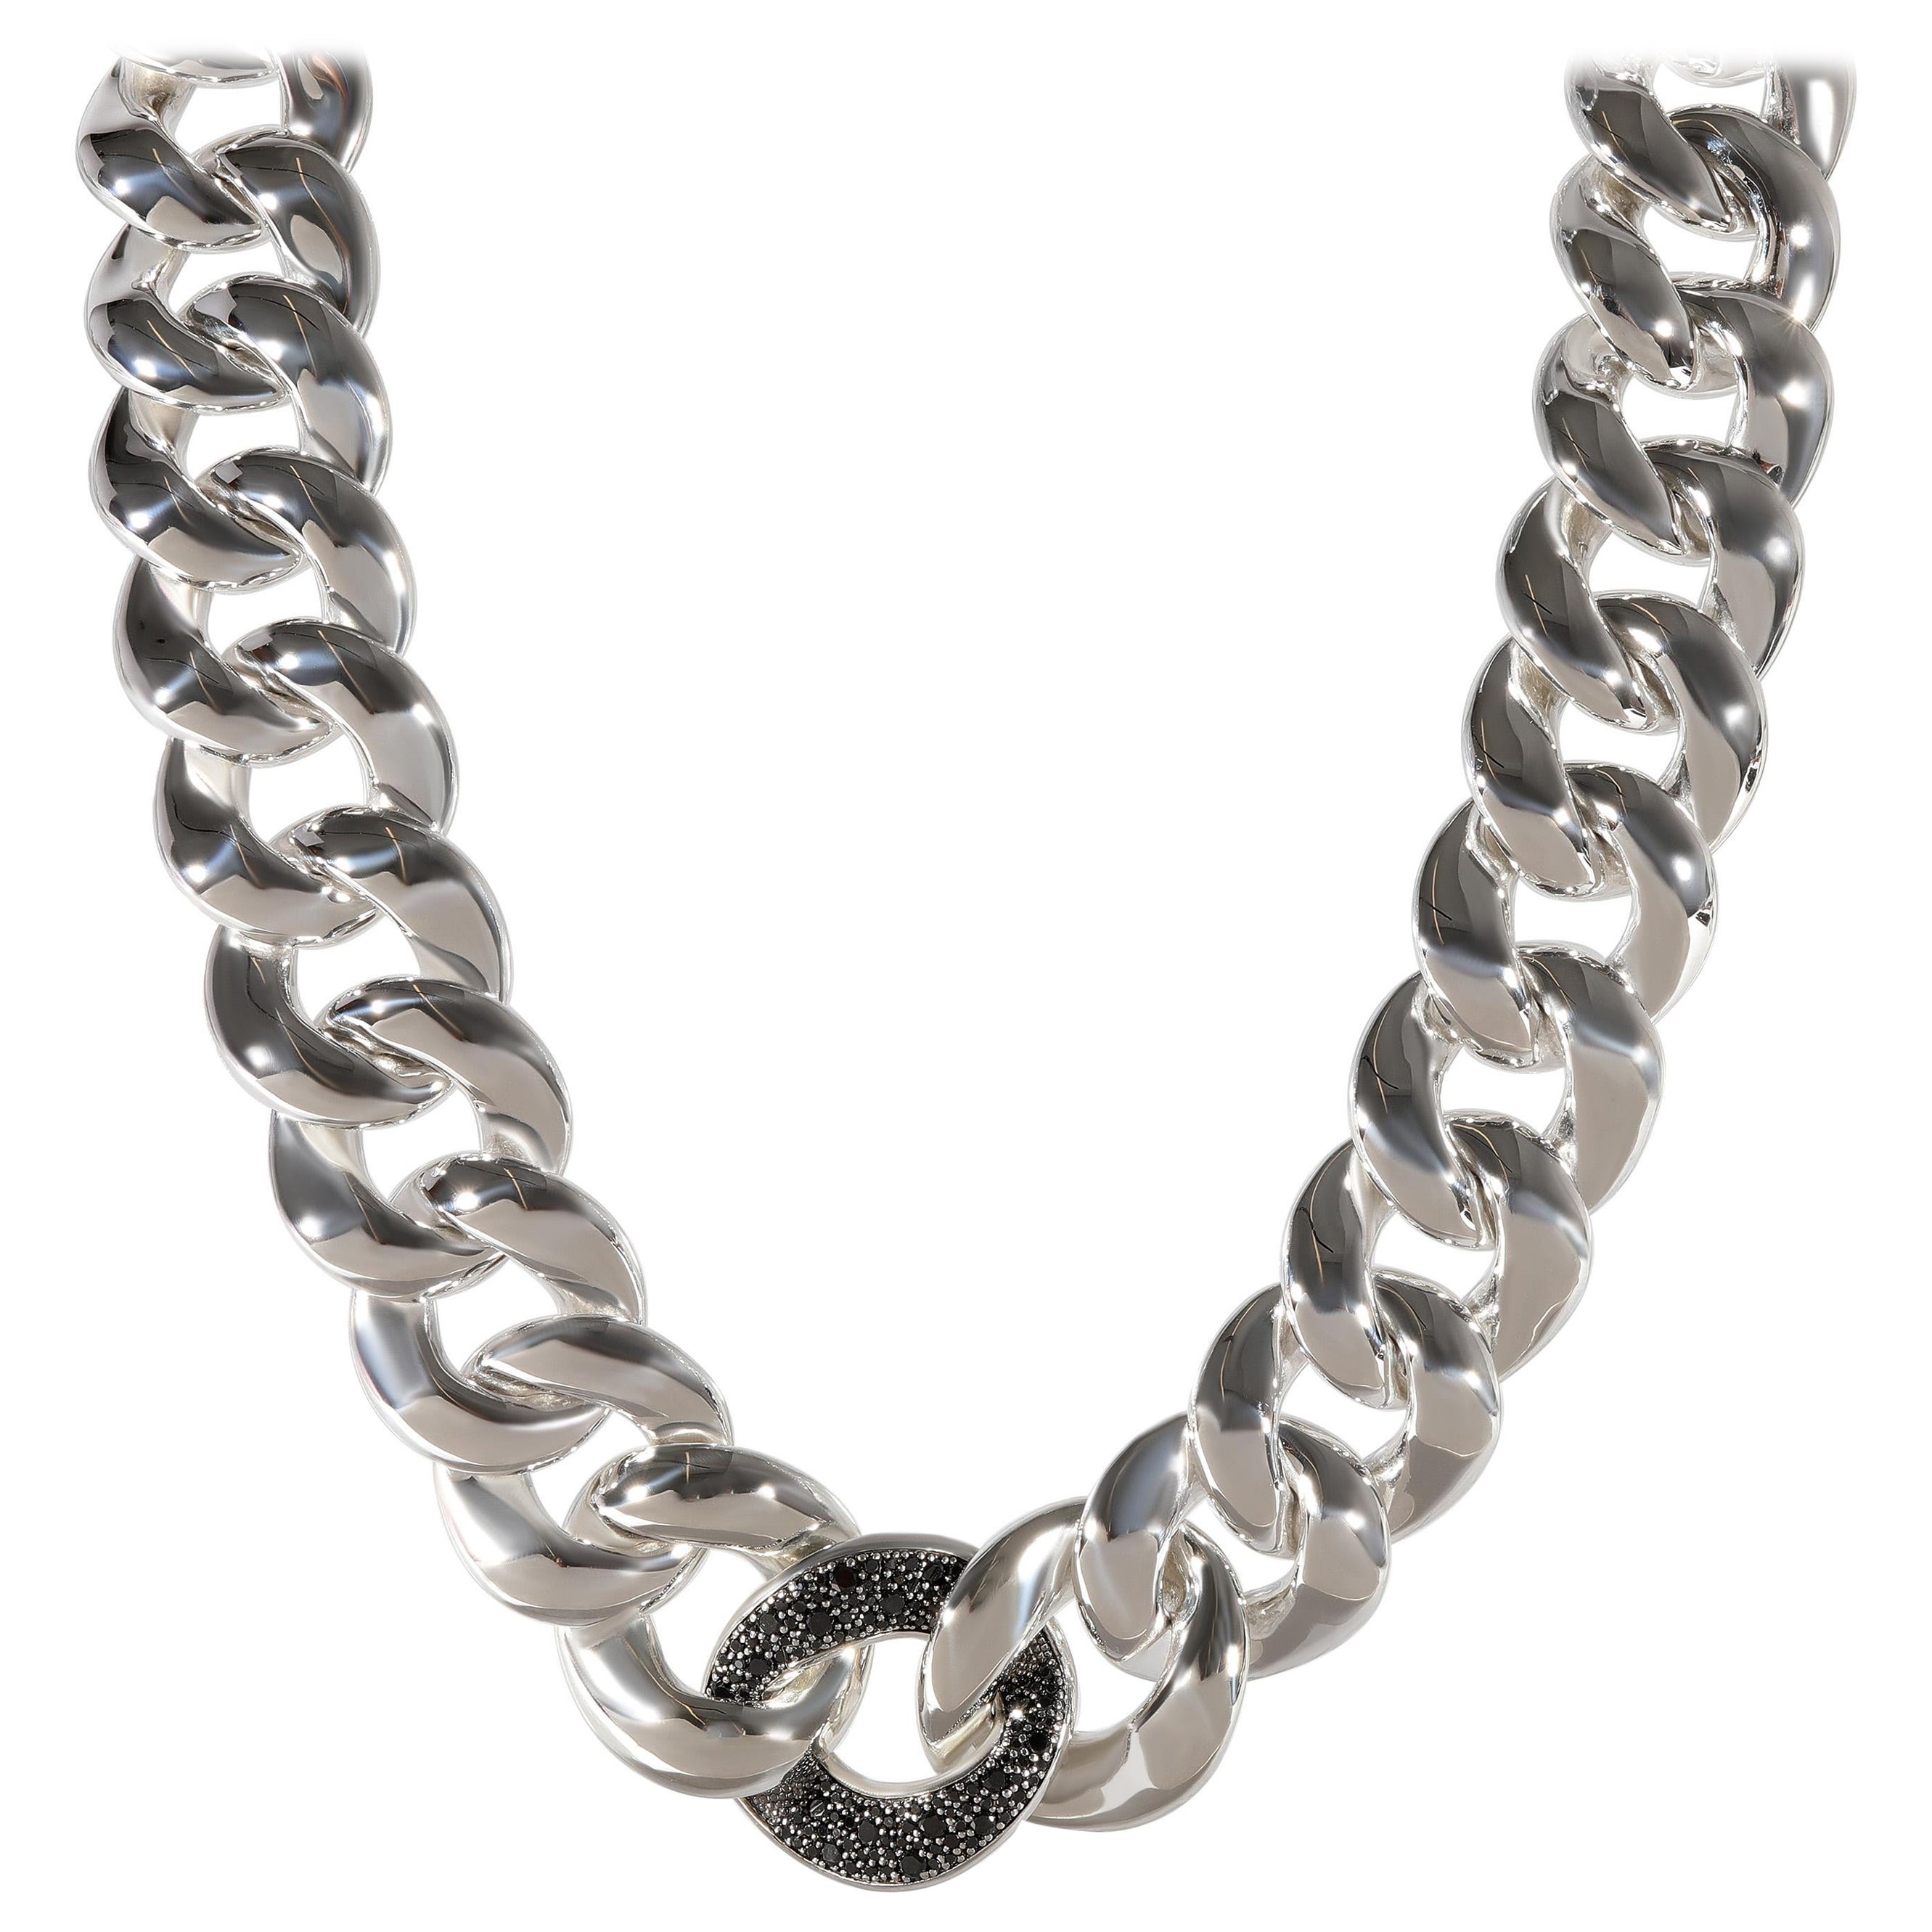 David Yurman Large Link Necklace With Black Pave Diamonds in Sterling Silver